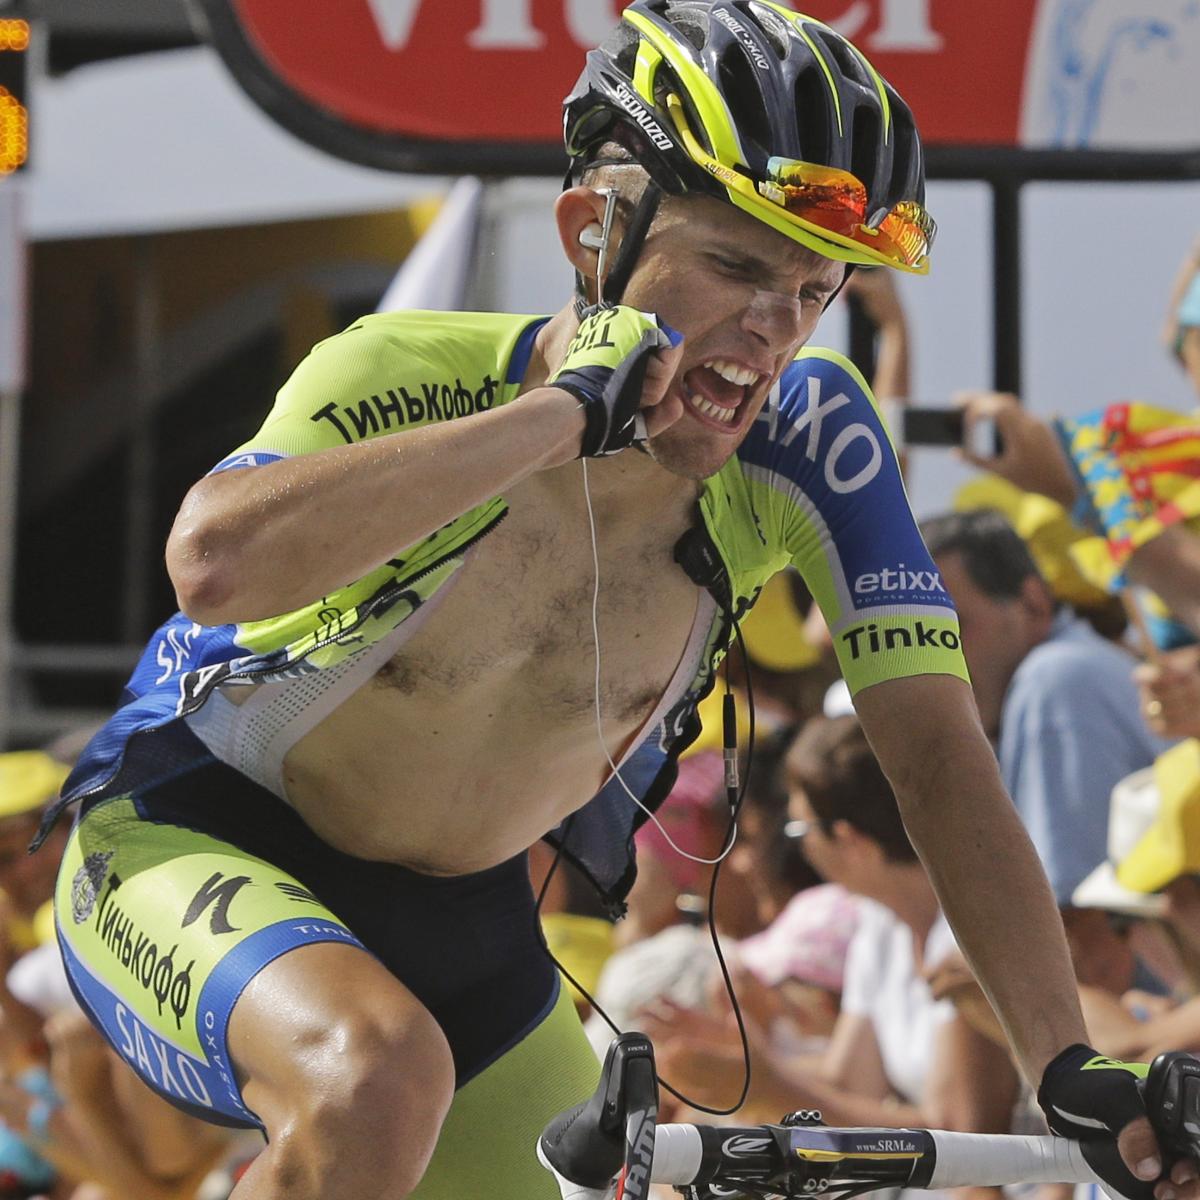 Tour de France 2014: Stage 14 Winner, Results and Updated Leaderboard